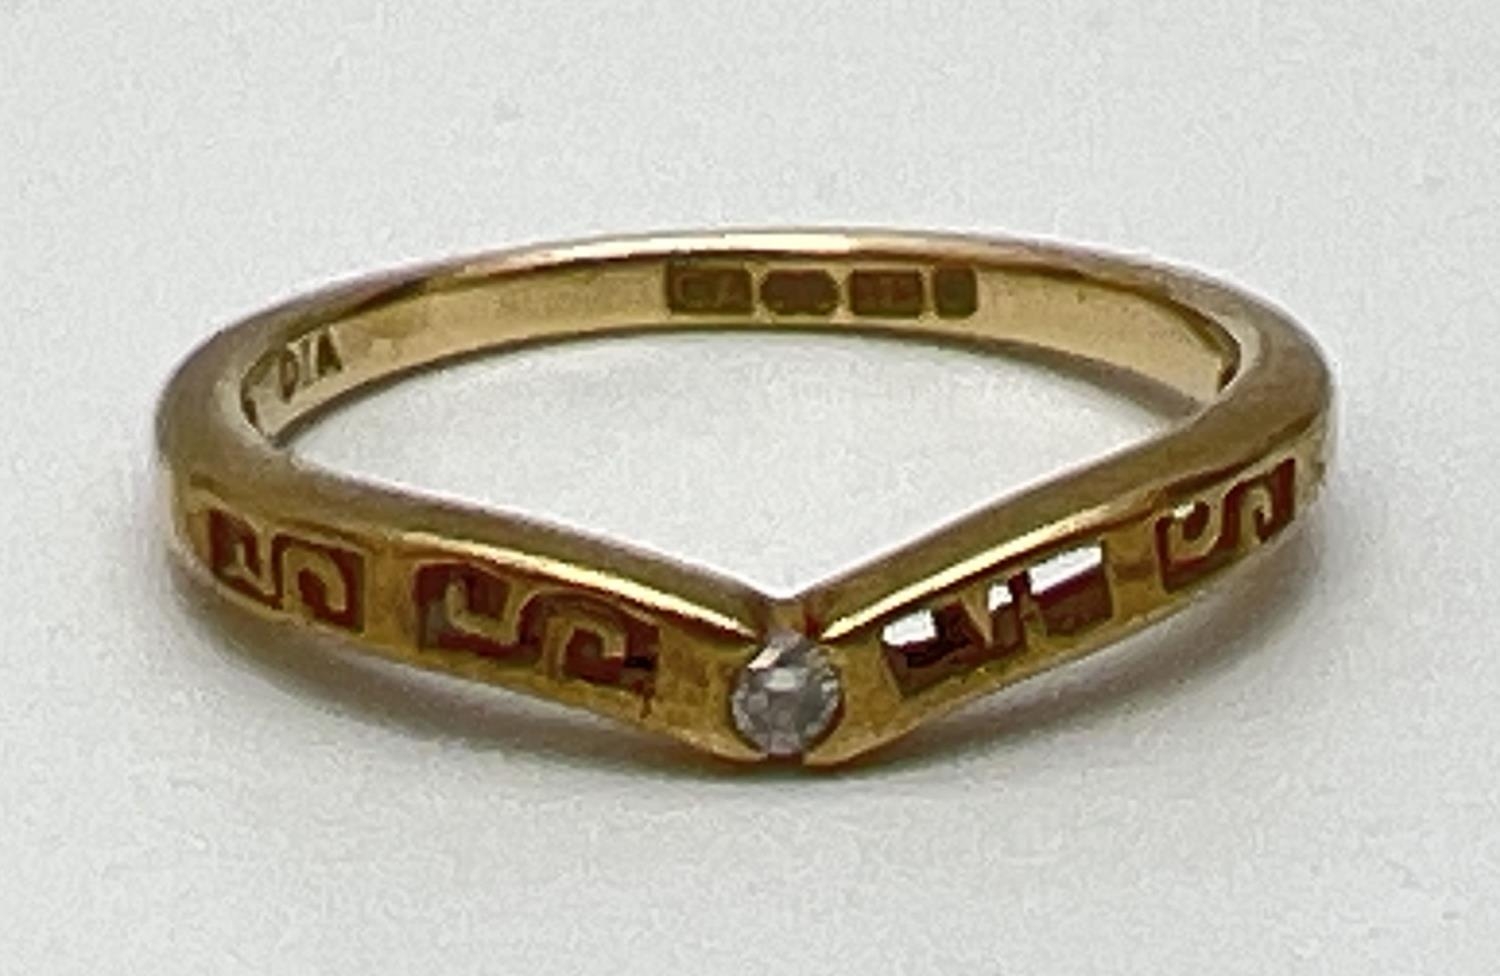 A 9ct yellow gold wishbone ring set with central diamond and with pierced work detail. Fully